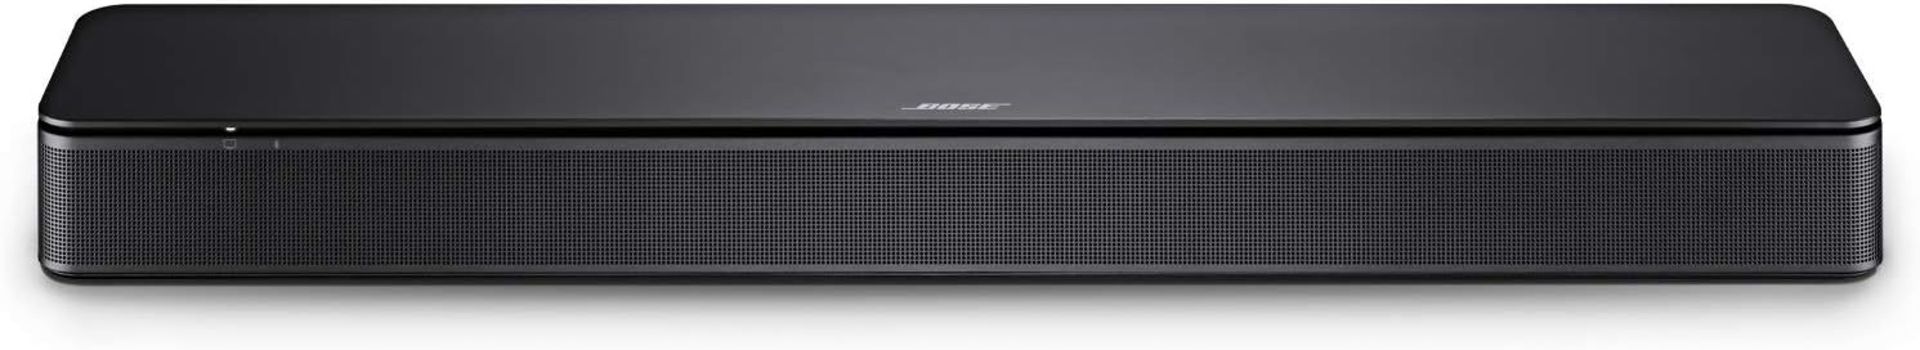 Bose TV Speaker - Small Soundbar with Bluetooth Connectivity. - R10BW. Hear your TV better—